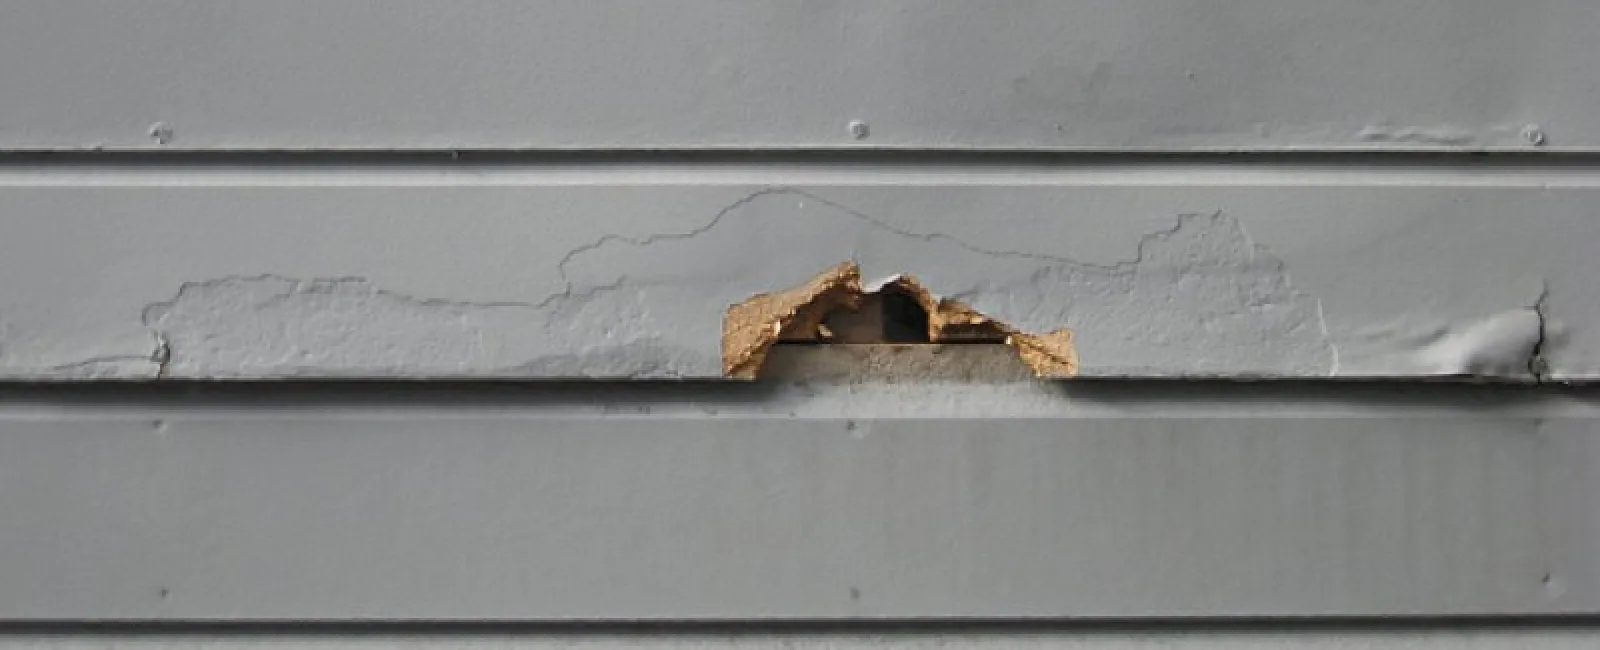 Home Siding Installation: Can You Replace Just the Damaged Area of Siding?